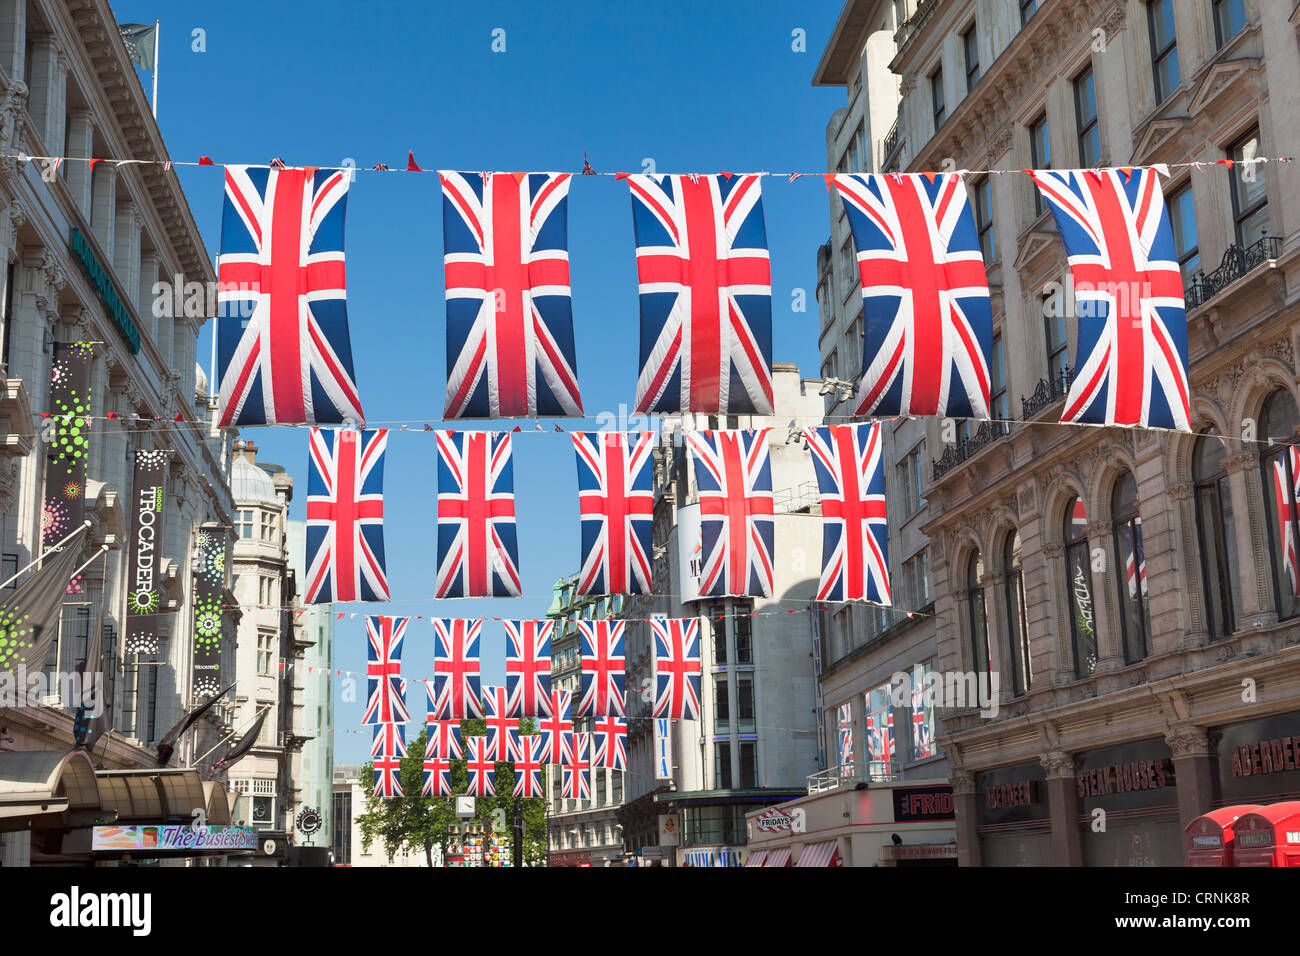 Street bunting for Queens diamond jubilee celebrations in central London, England Stock Photo